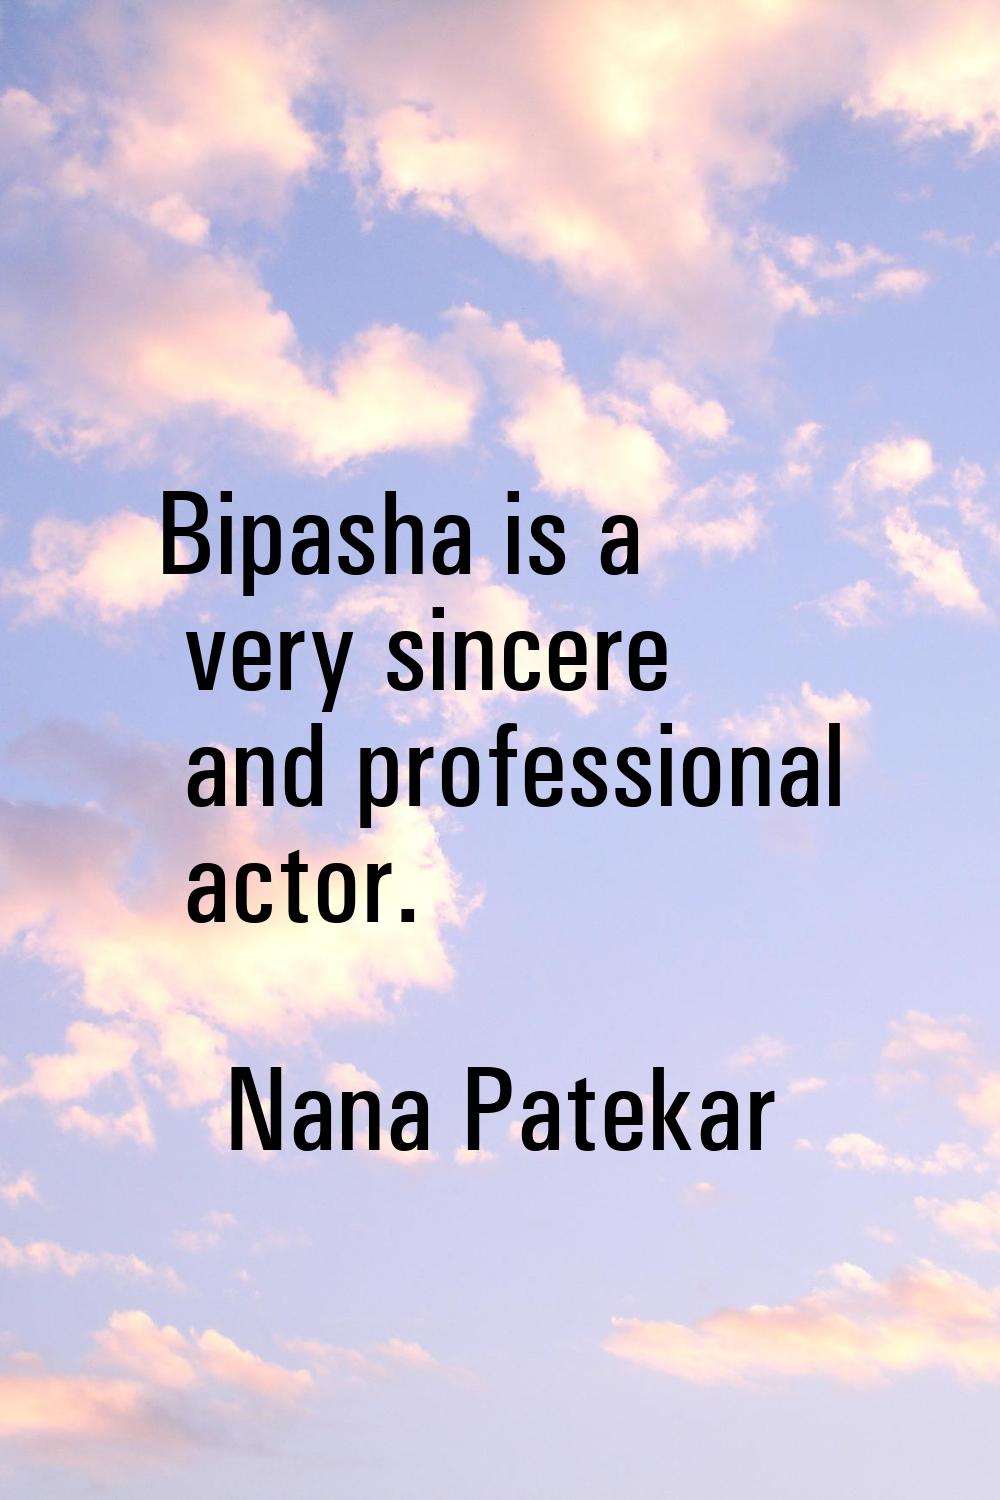 Bipasha is a very sincere and professional actor.